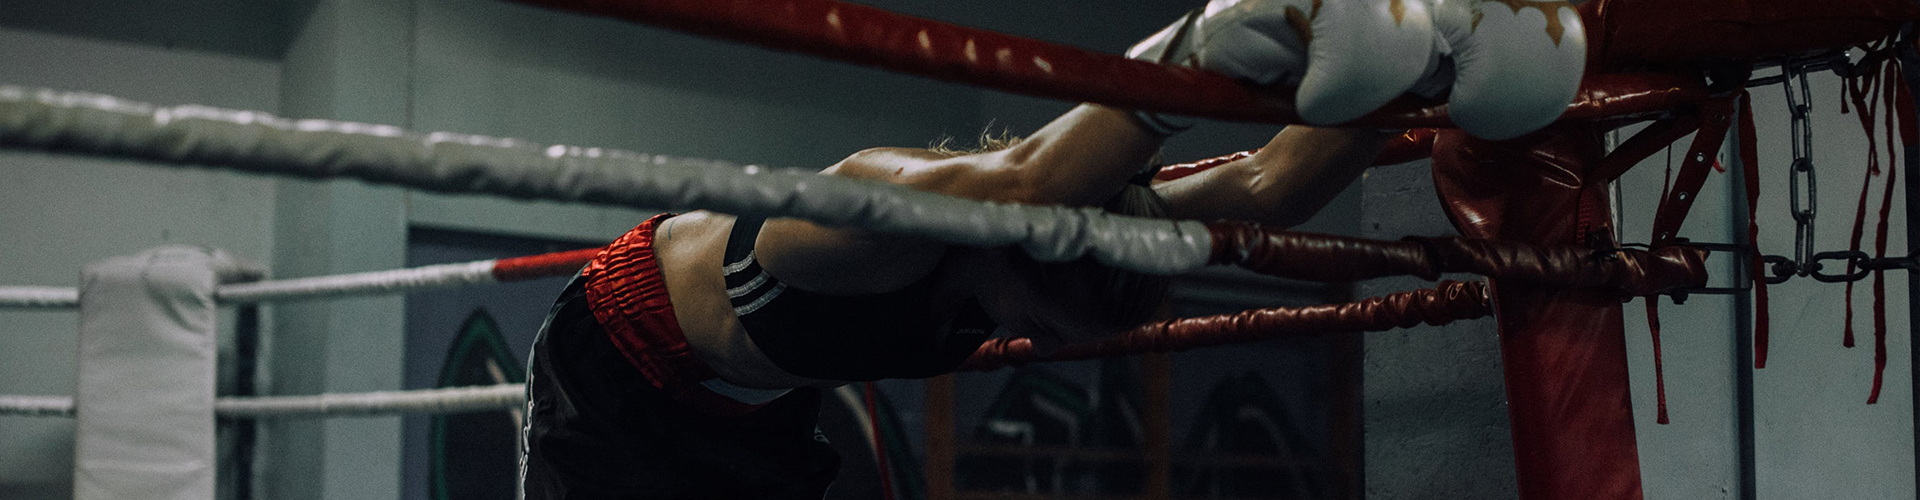 The Best Cardio Training Exercises for Boxers